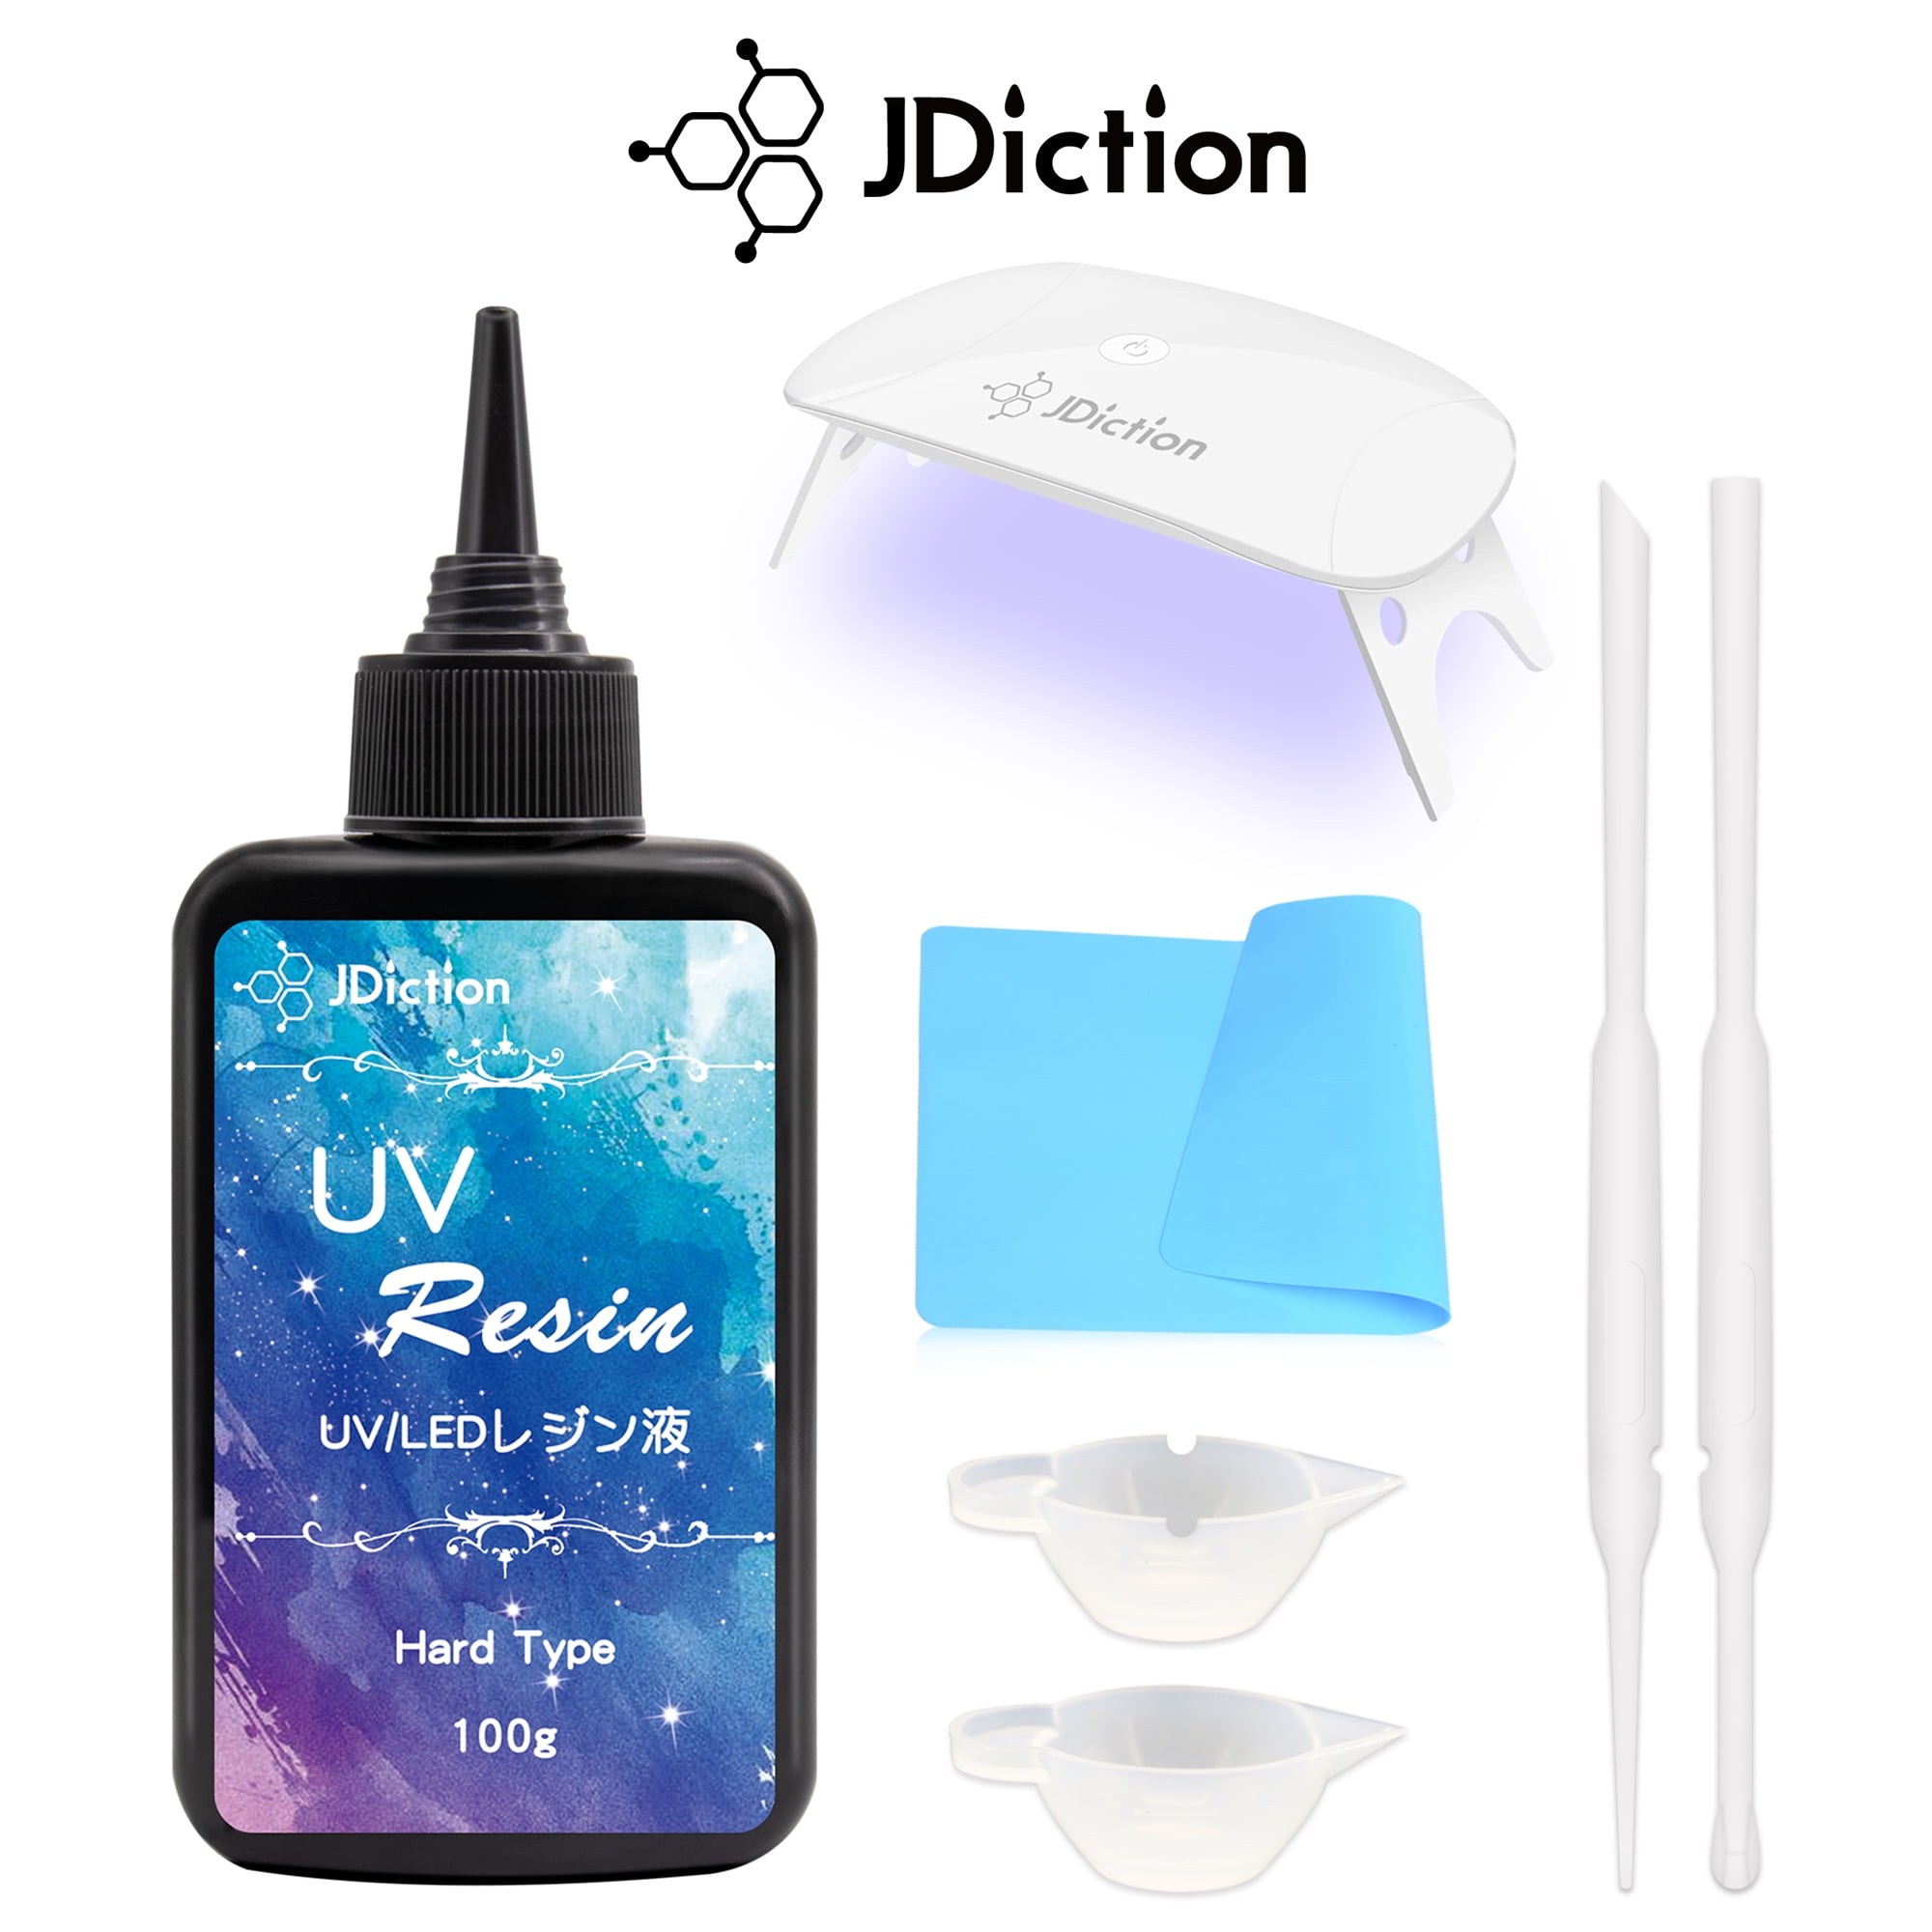 JDiction Resin Kit with Light/Lamp, Jewelry Making Clear Epoxy Resin Kit for Beginner - Walmart.com